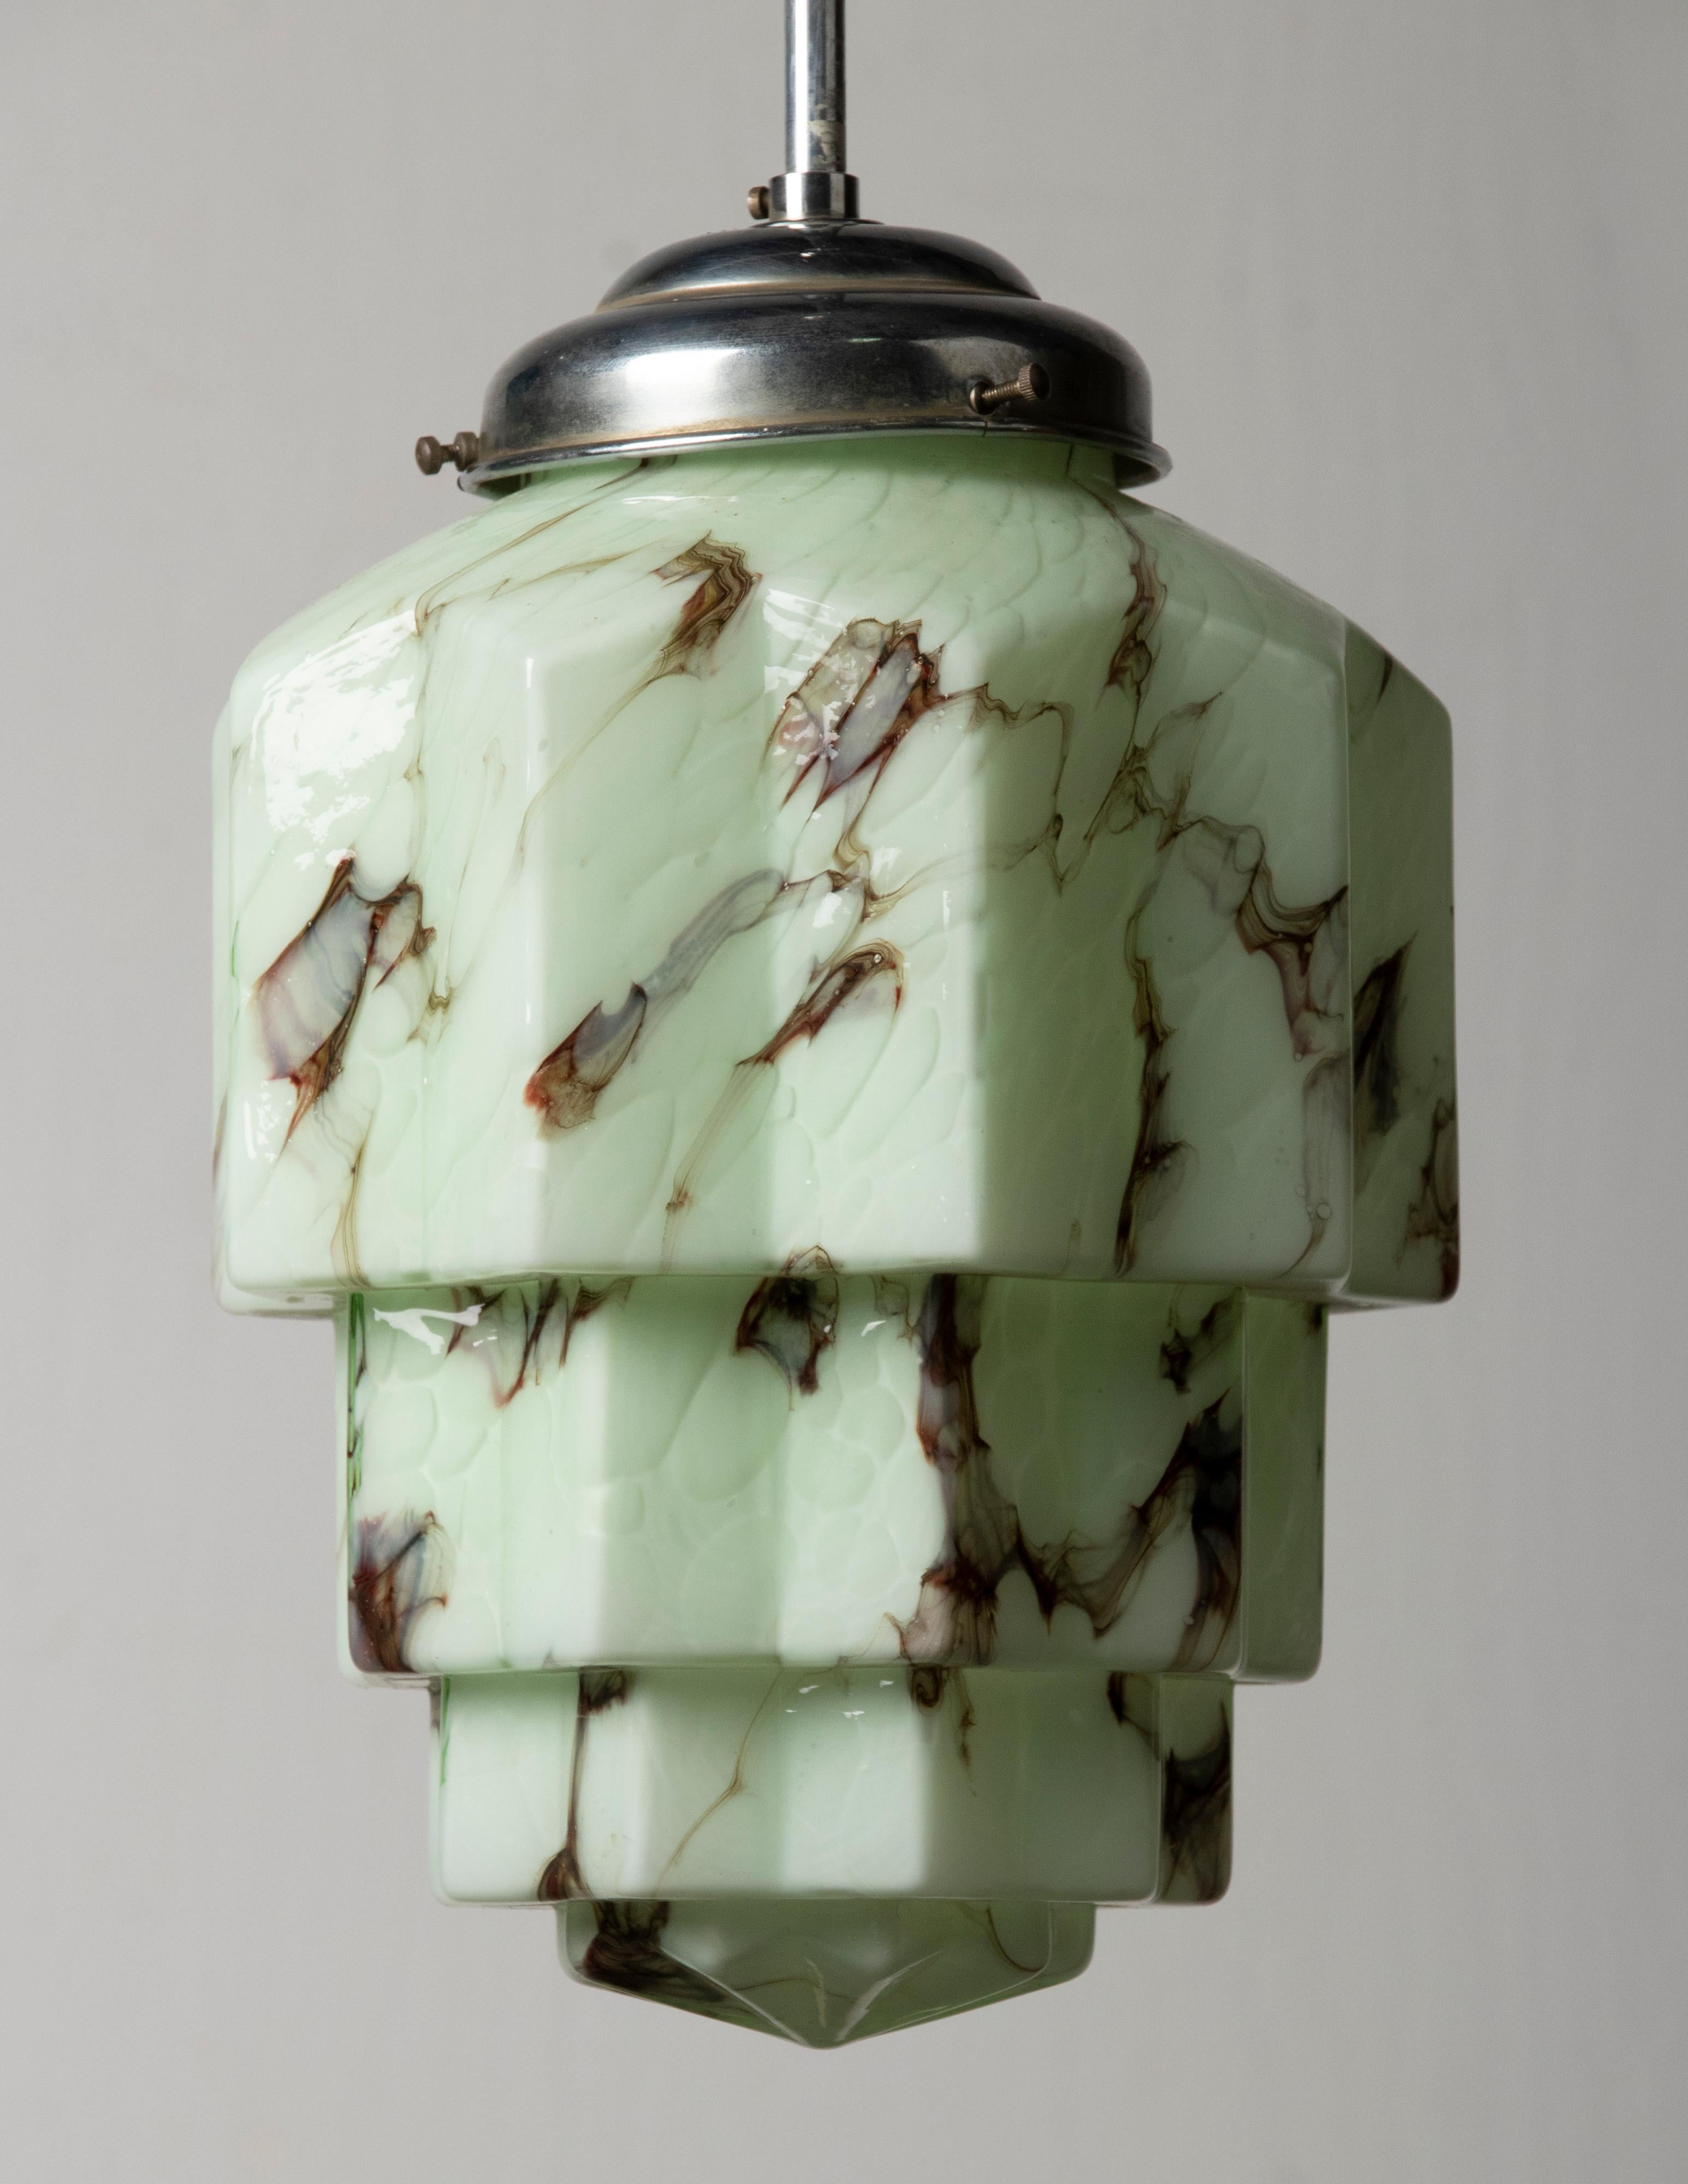 An Art Deco period Skyscraper Lantern/Hallway lamp. The molded green art glass shades is also called Skyscraper model. When the light is switched on, ti givers a warm and atmospheric light. 
The design is inspired by the Art Deco architecture, like